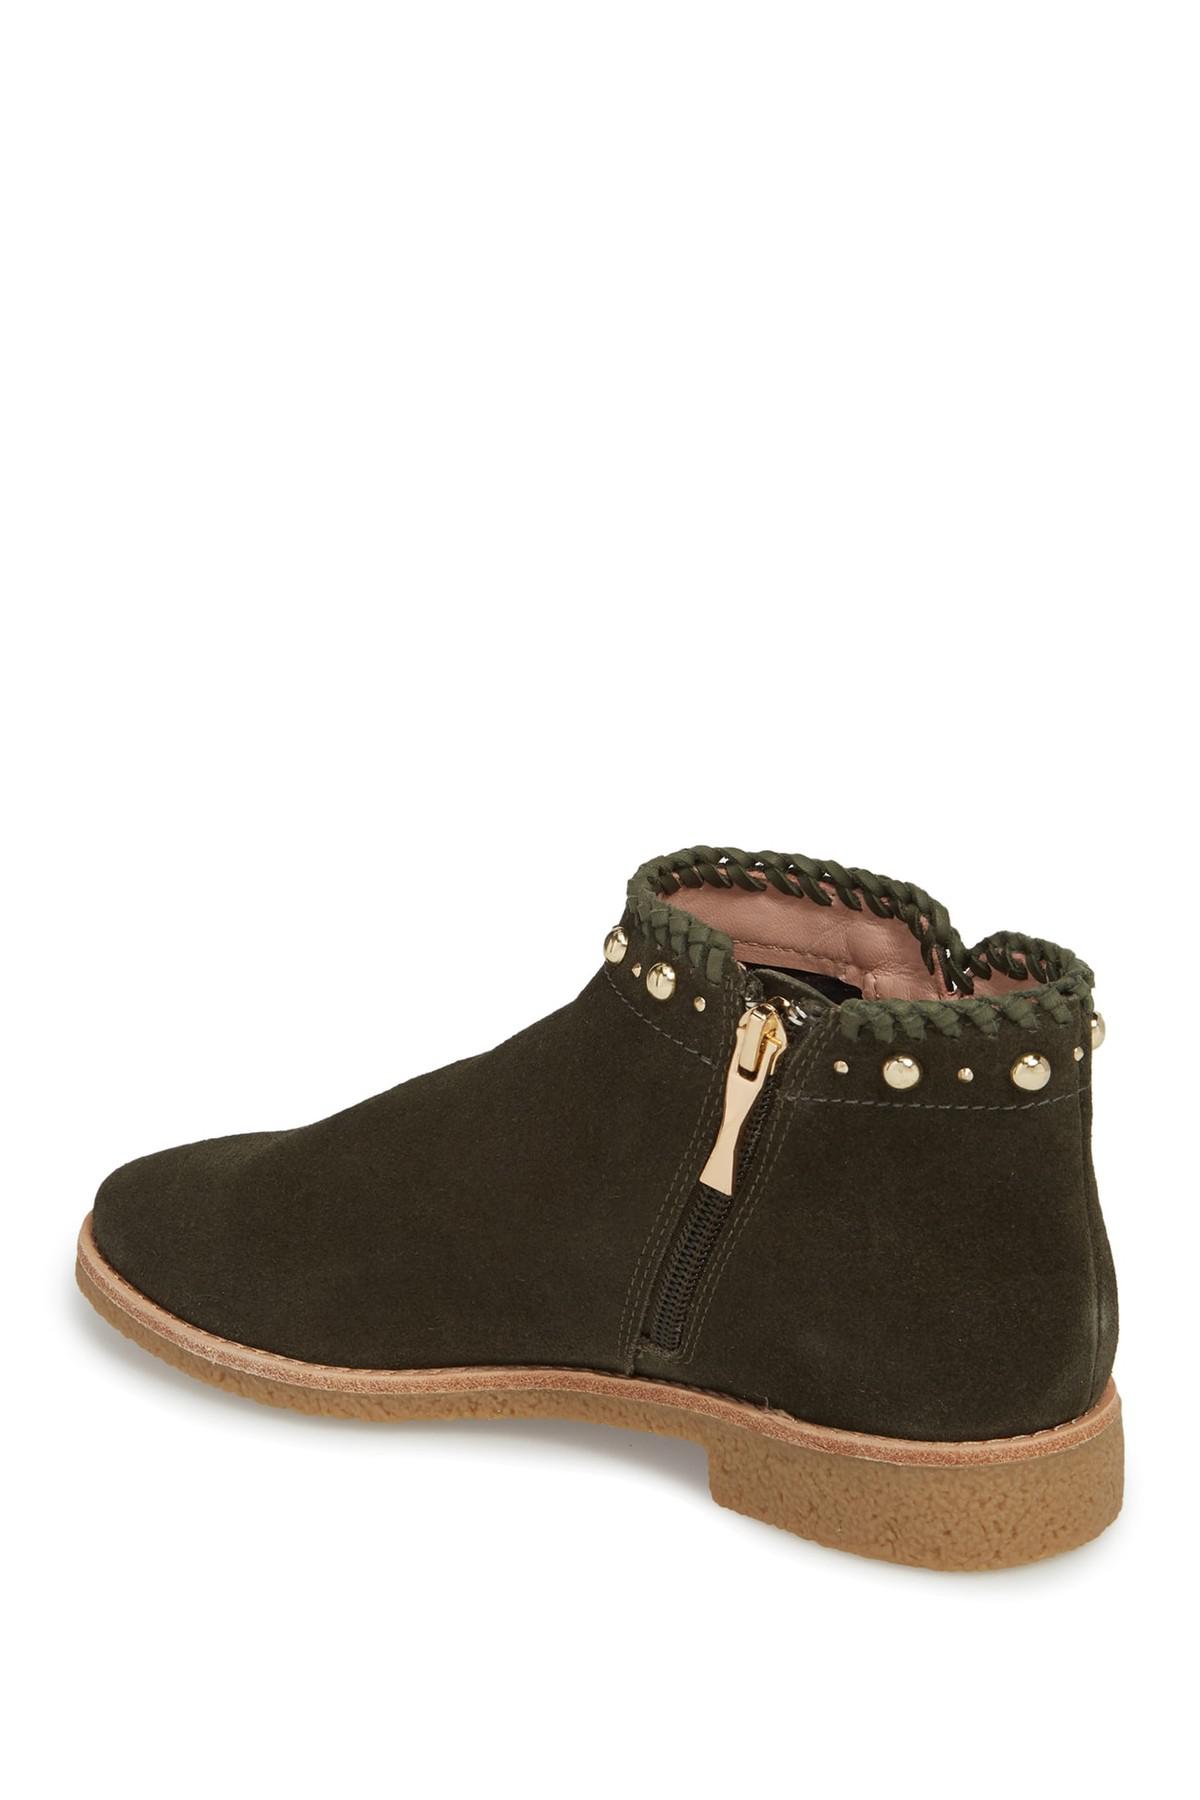 kate spade bowie bootie